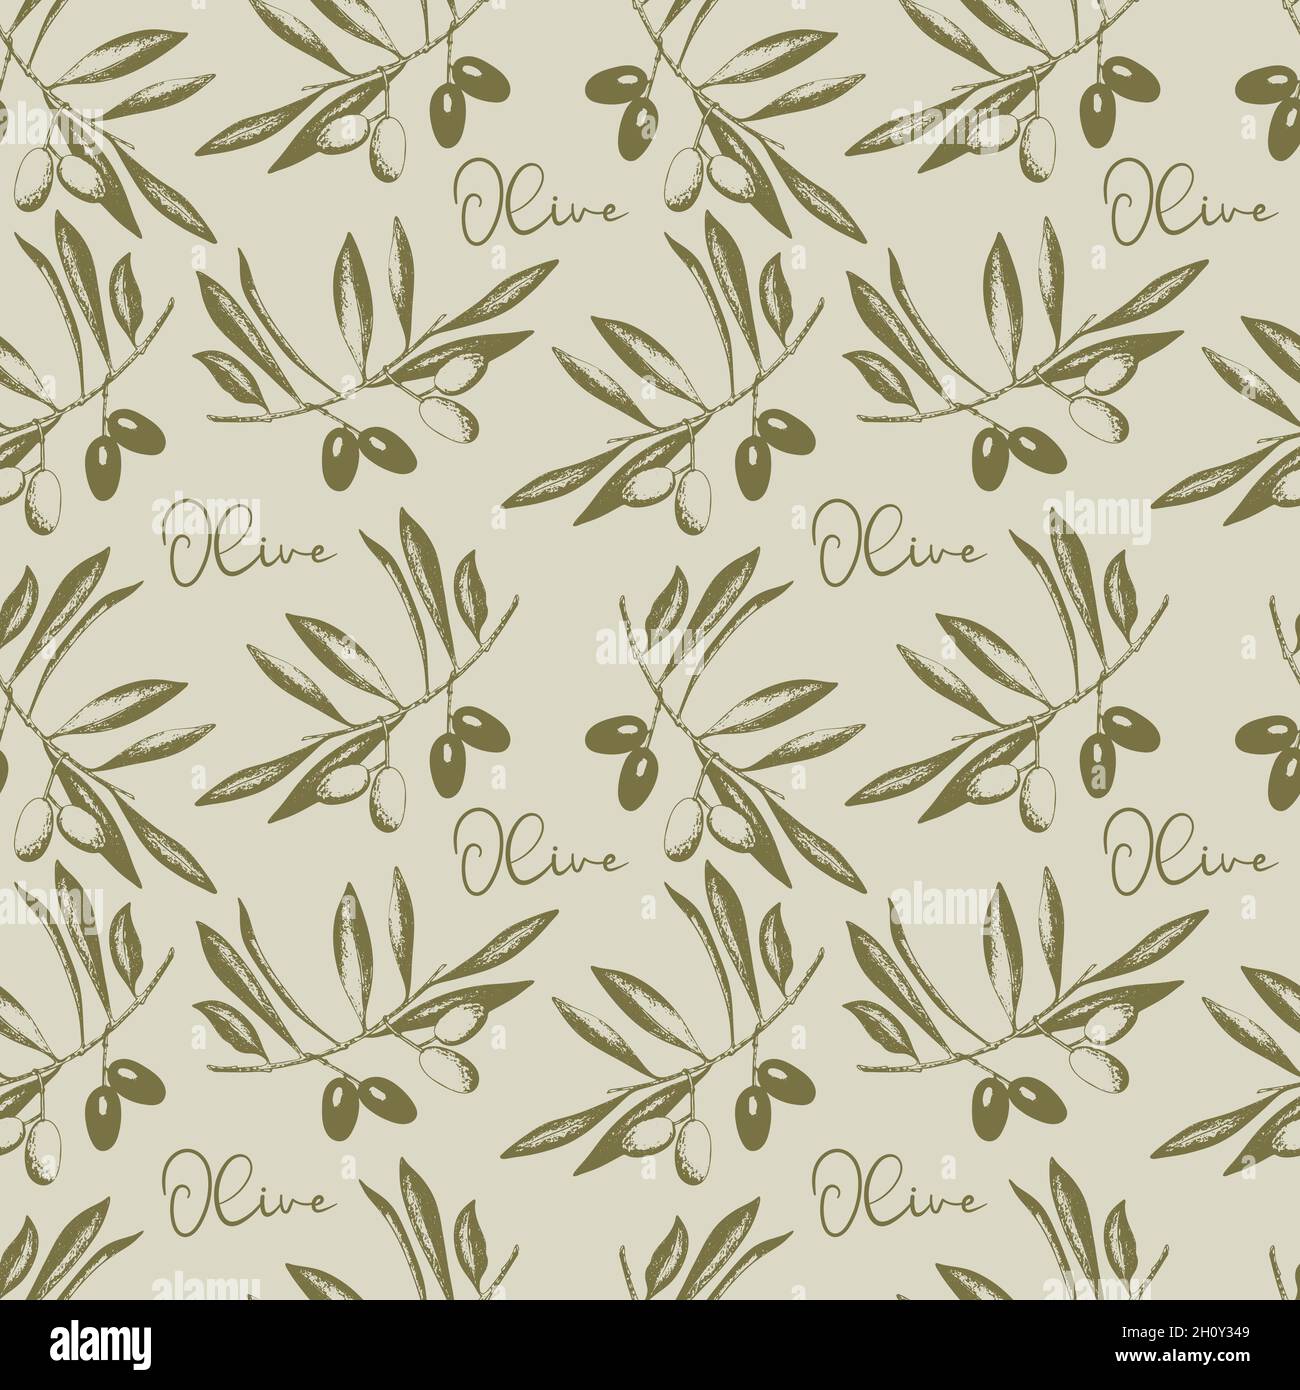 Olives Branch With Fruits And Leaves Seamless Pattern Imprint Stamp Sketch Vector 